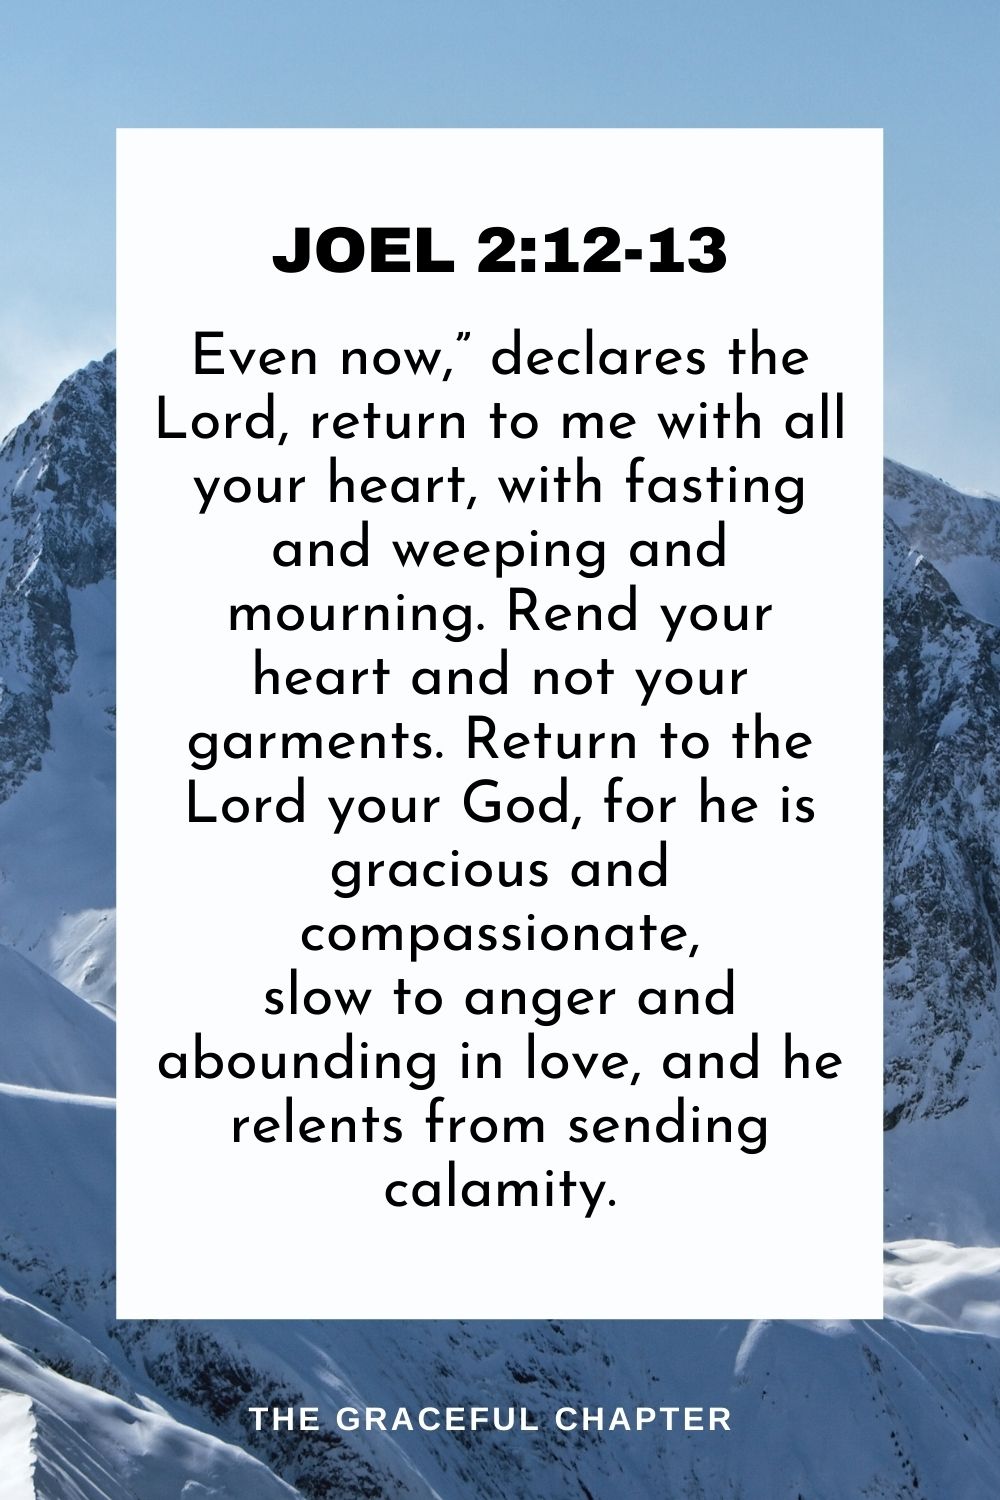 Even now,” declares the Lord, return to me with all your heart, with fasting and weeping and mourning. Rend your heart and not your garments. Return to the Lord your God, for he is gracious and compassionate, slow to anger and abounding in love, and he relents from sending calamity. Joel 2:12-13